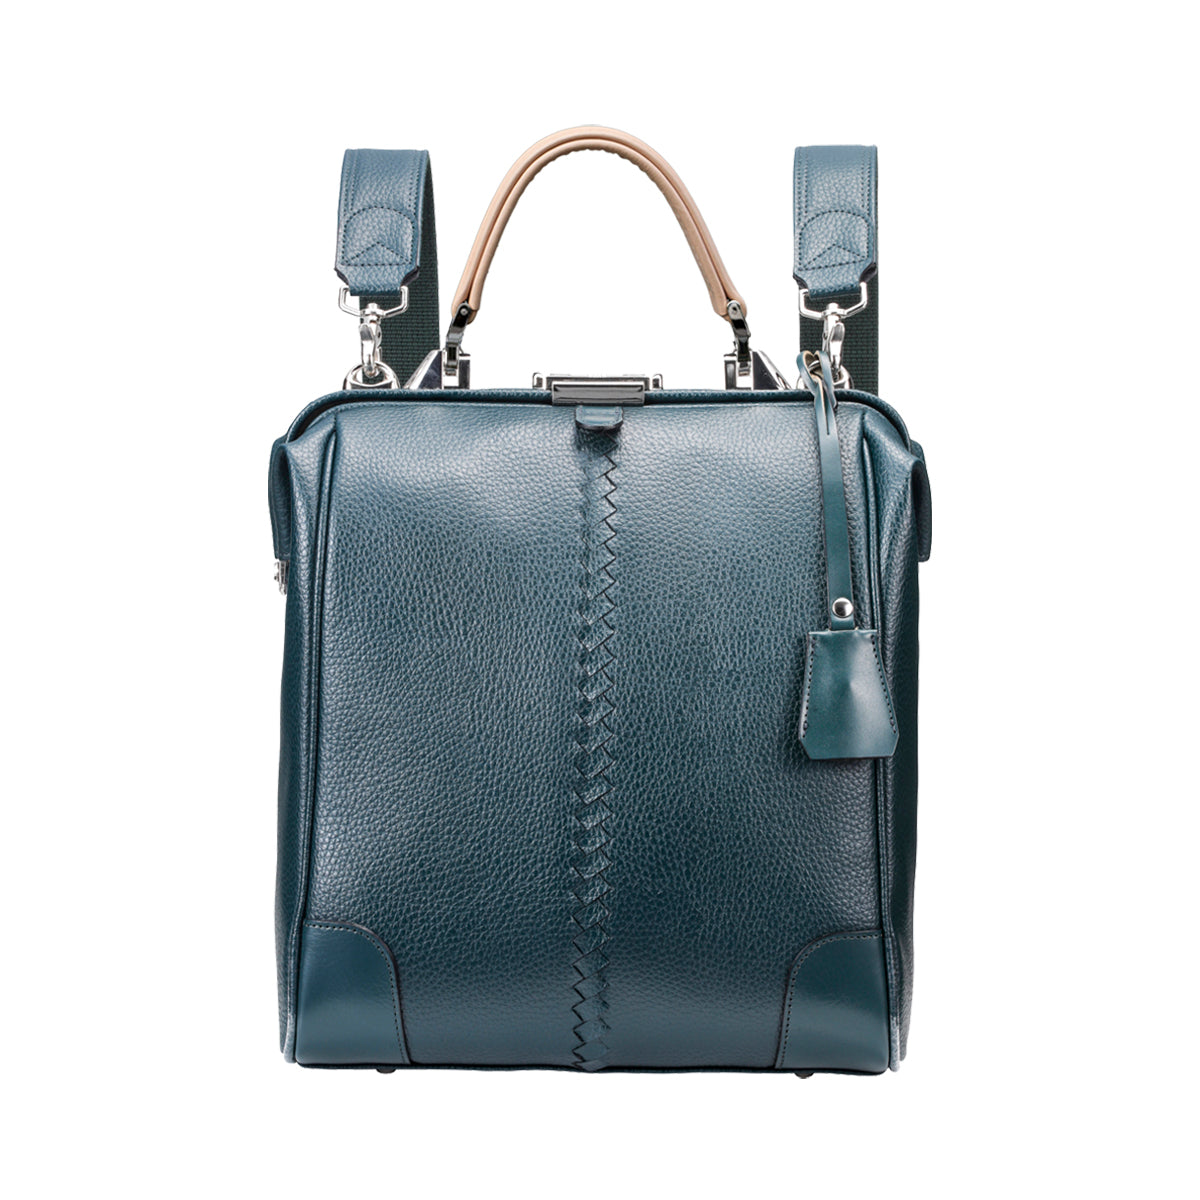 ◆Toyooka Bags Certified Dulles Bag with Genuine Leather Attachment S Size [Nubuck Leather Long Handle Set] YK9 [ELK] Dark Green